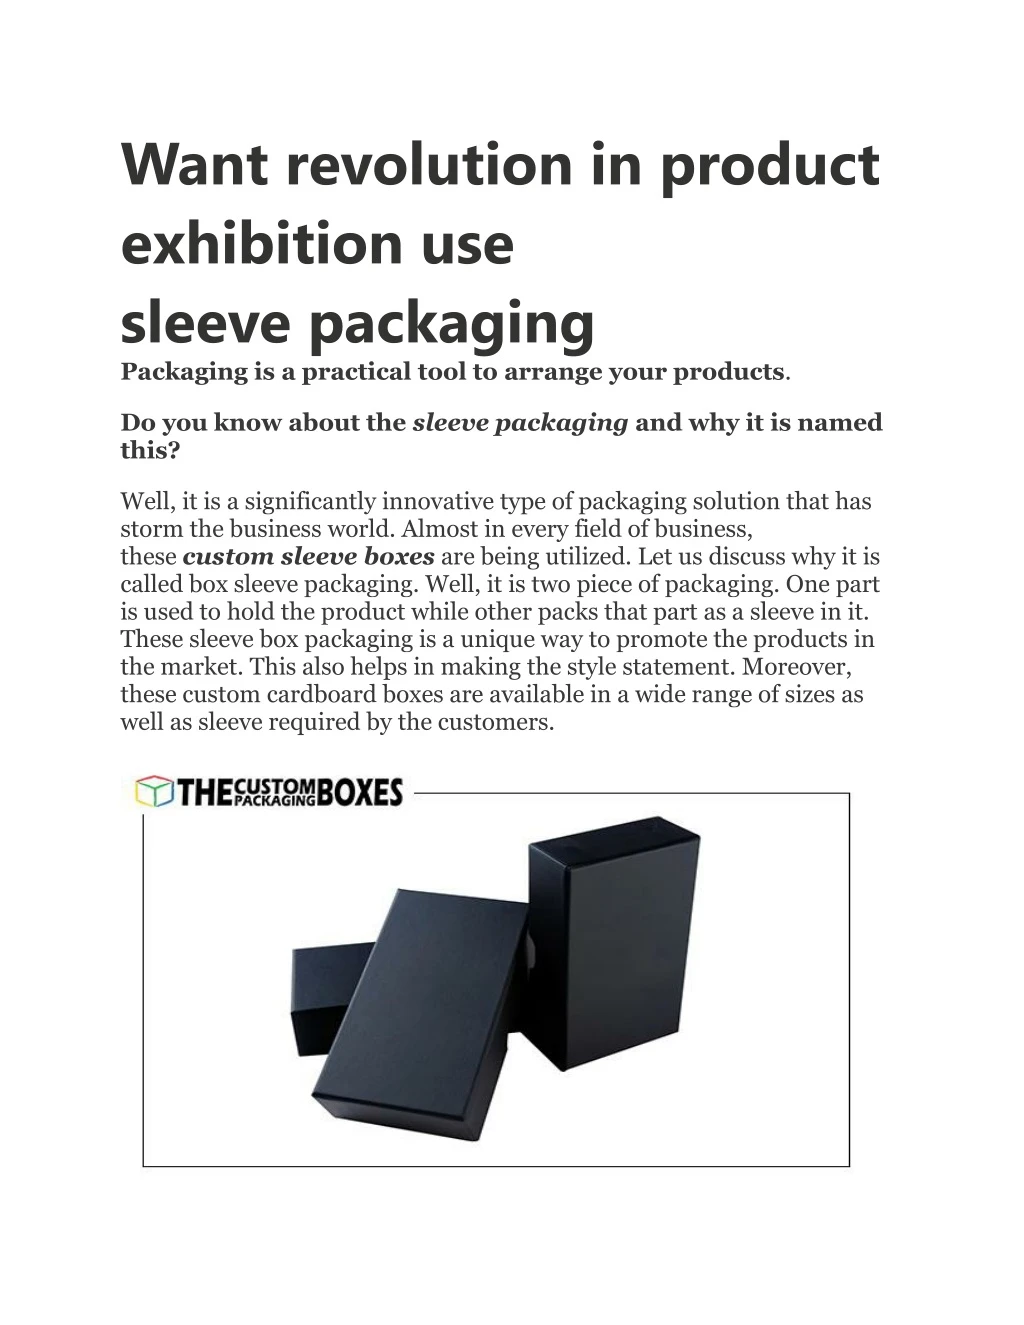 want revolution in product exhibition use sleeve